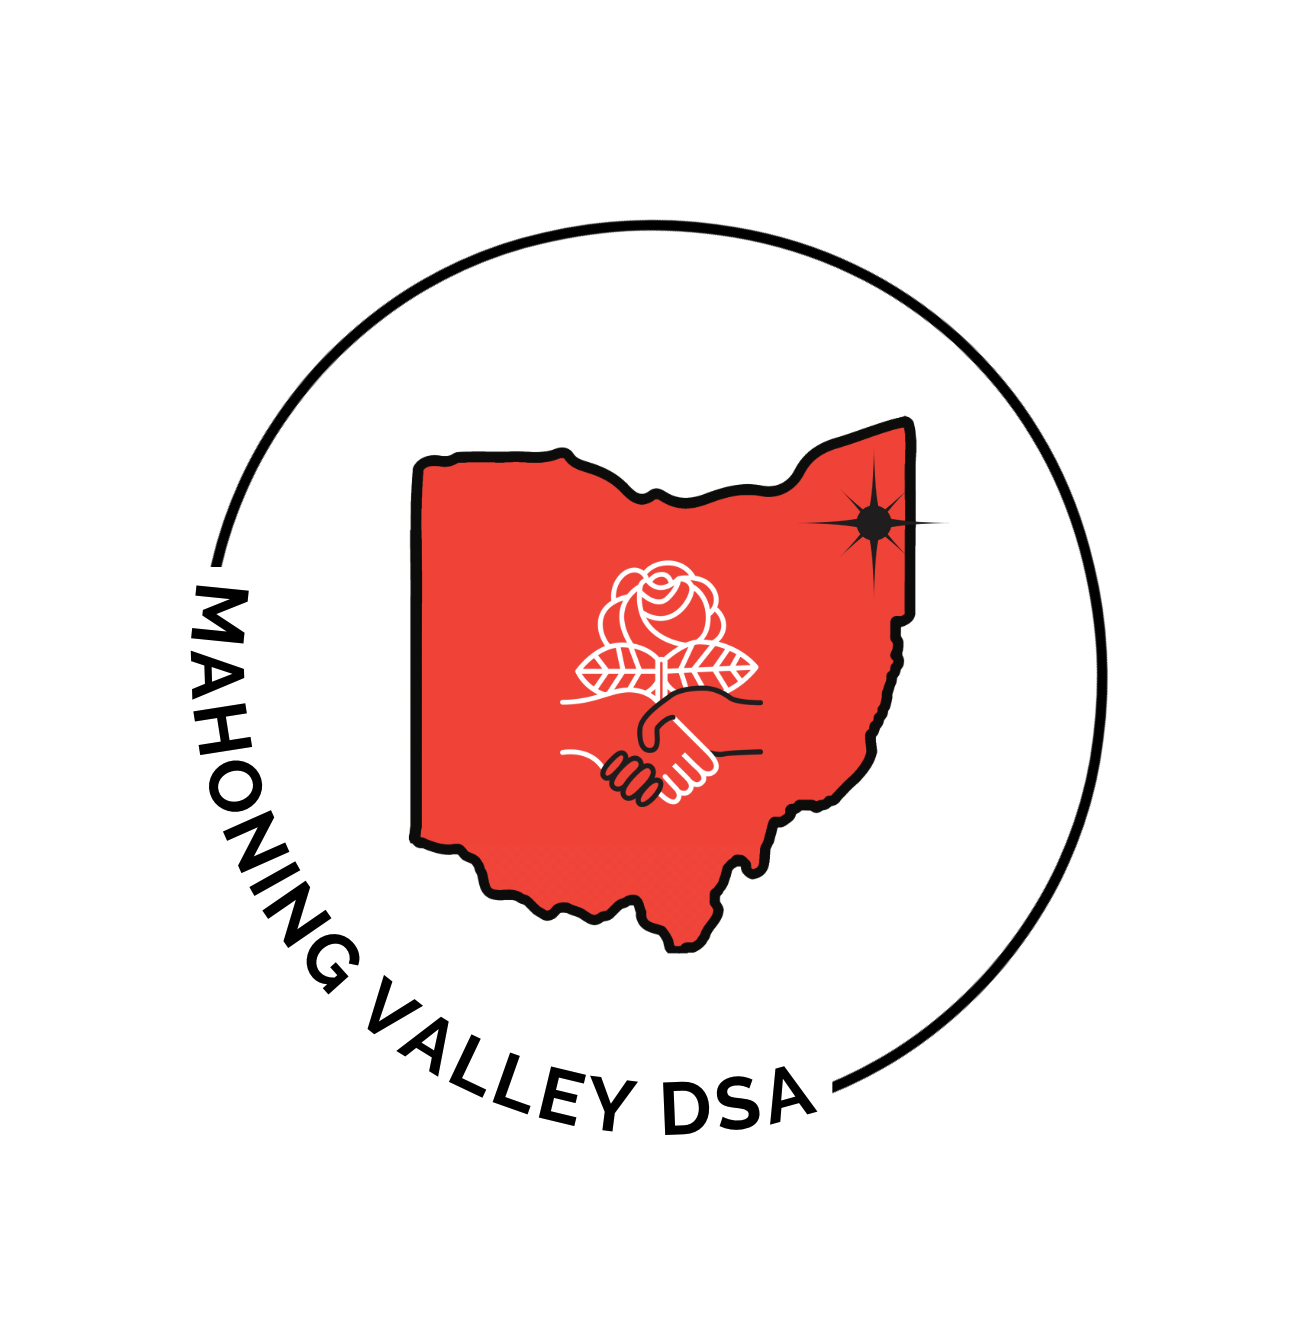 Mahoning Valley DSA Logo: The DSA logo placed inside the state of Ohio